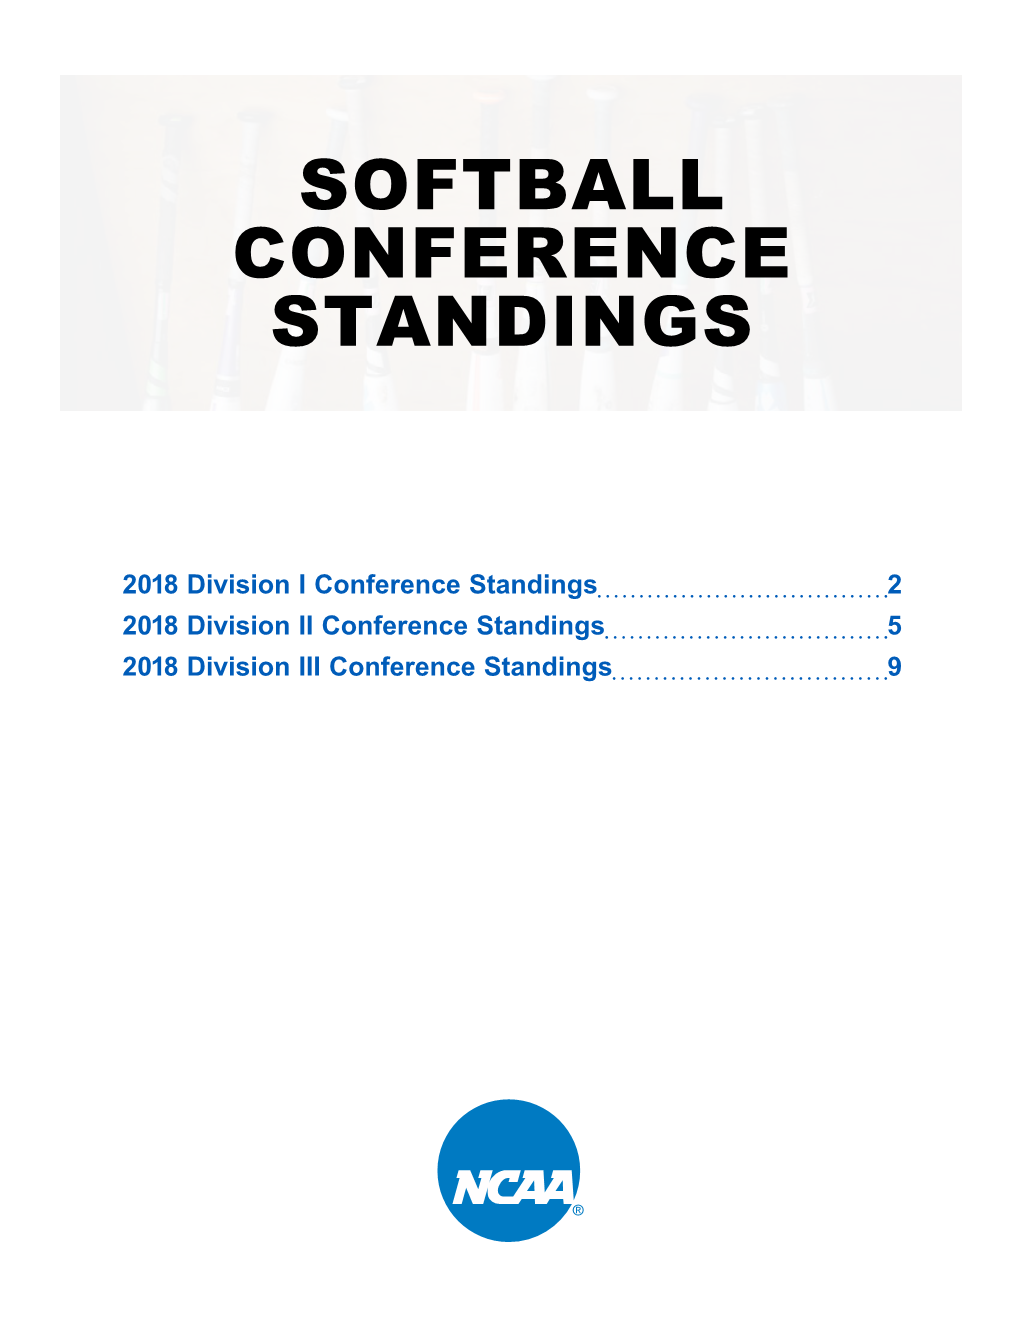 Softball Conference Standings